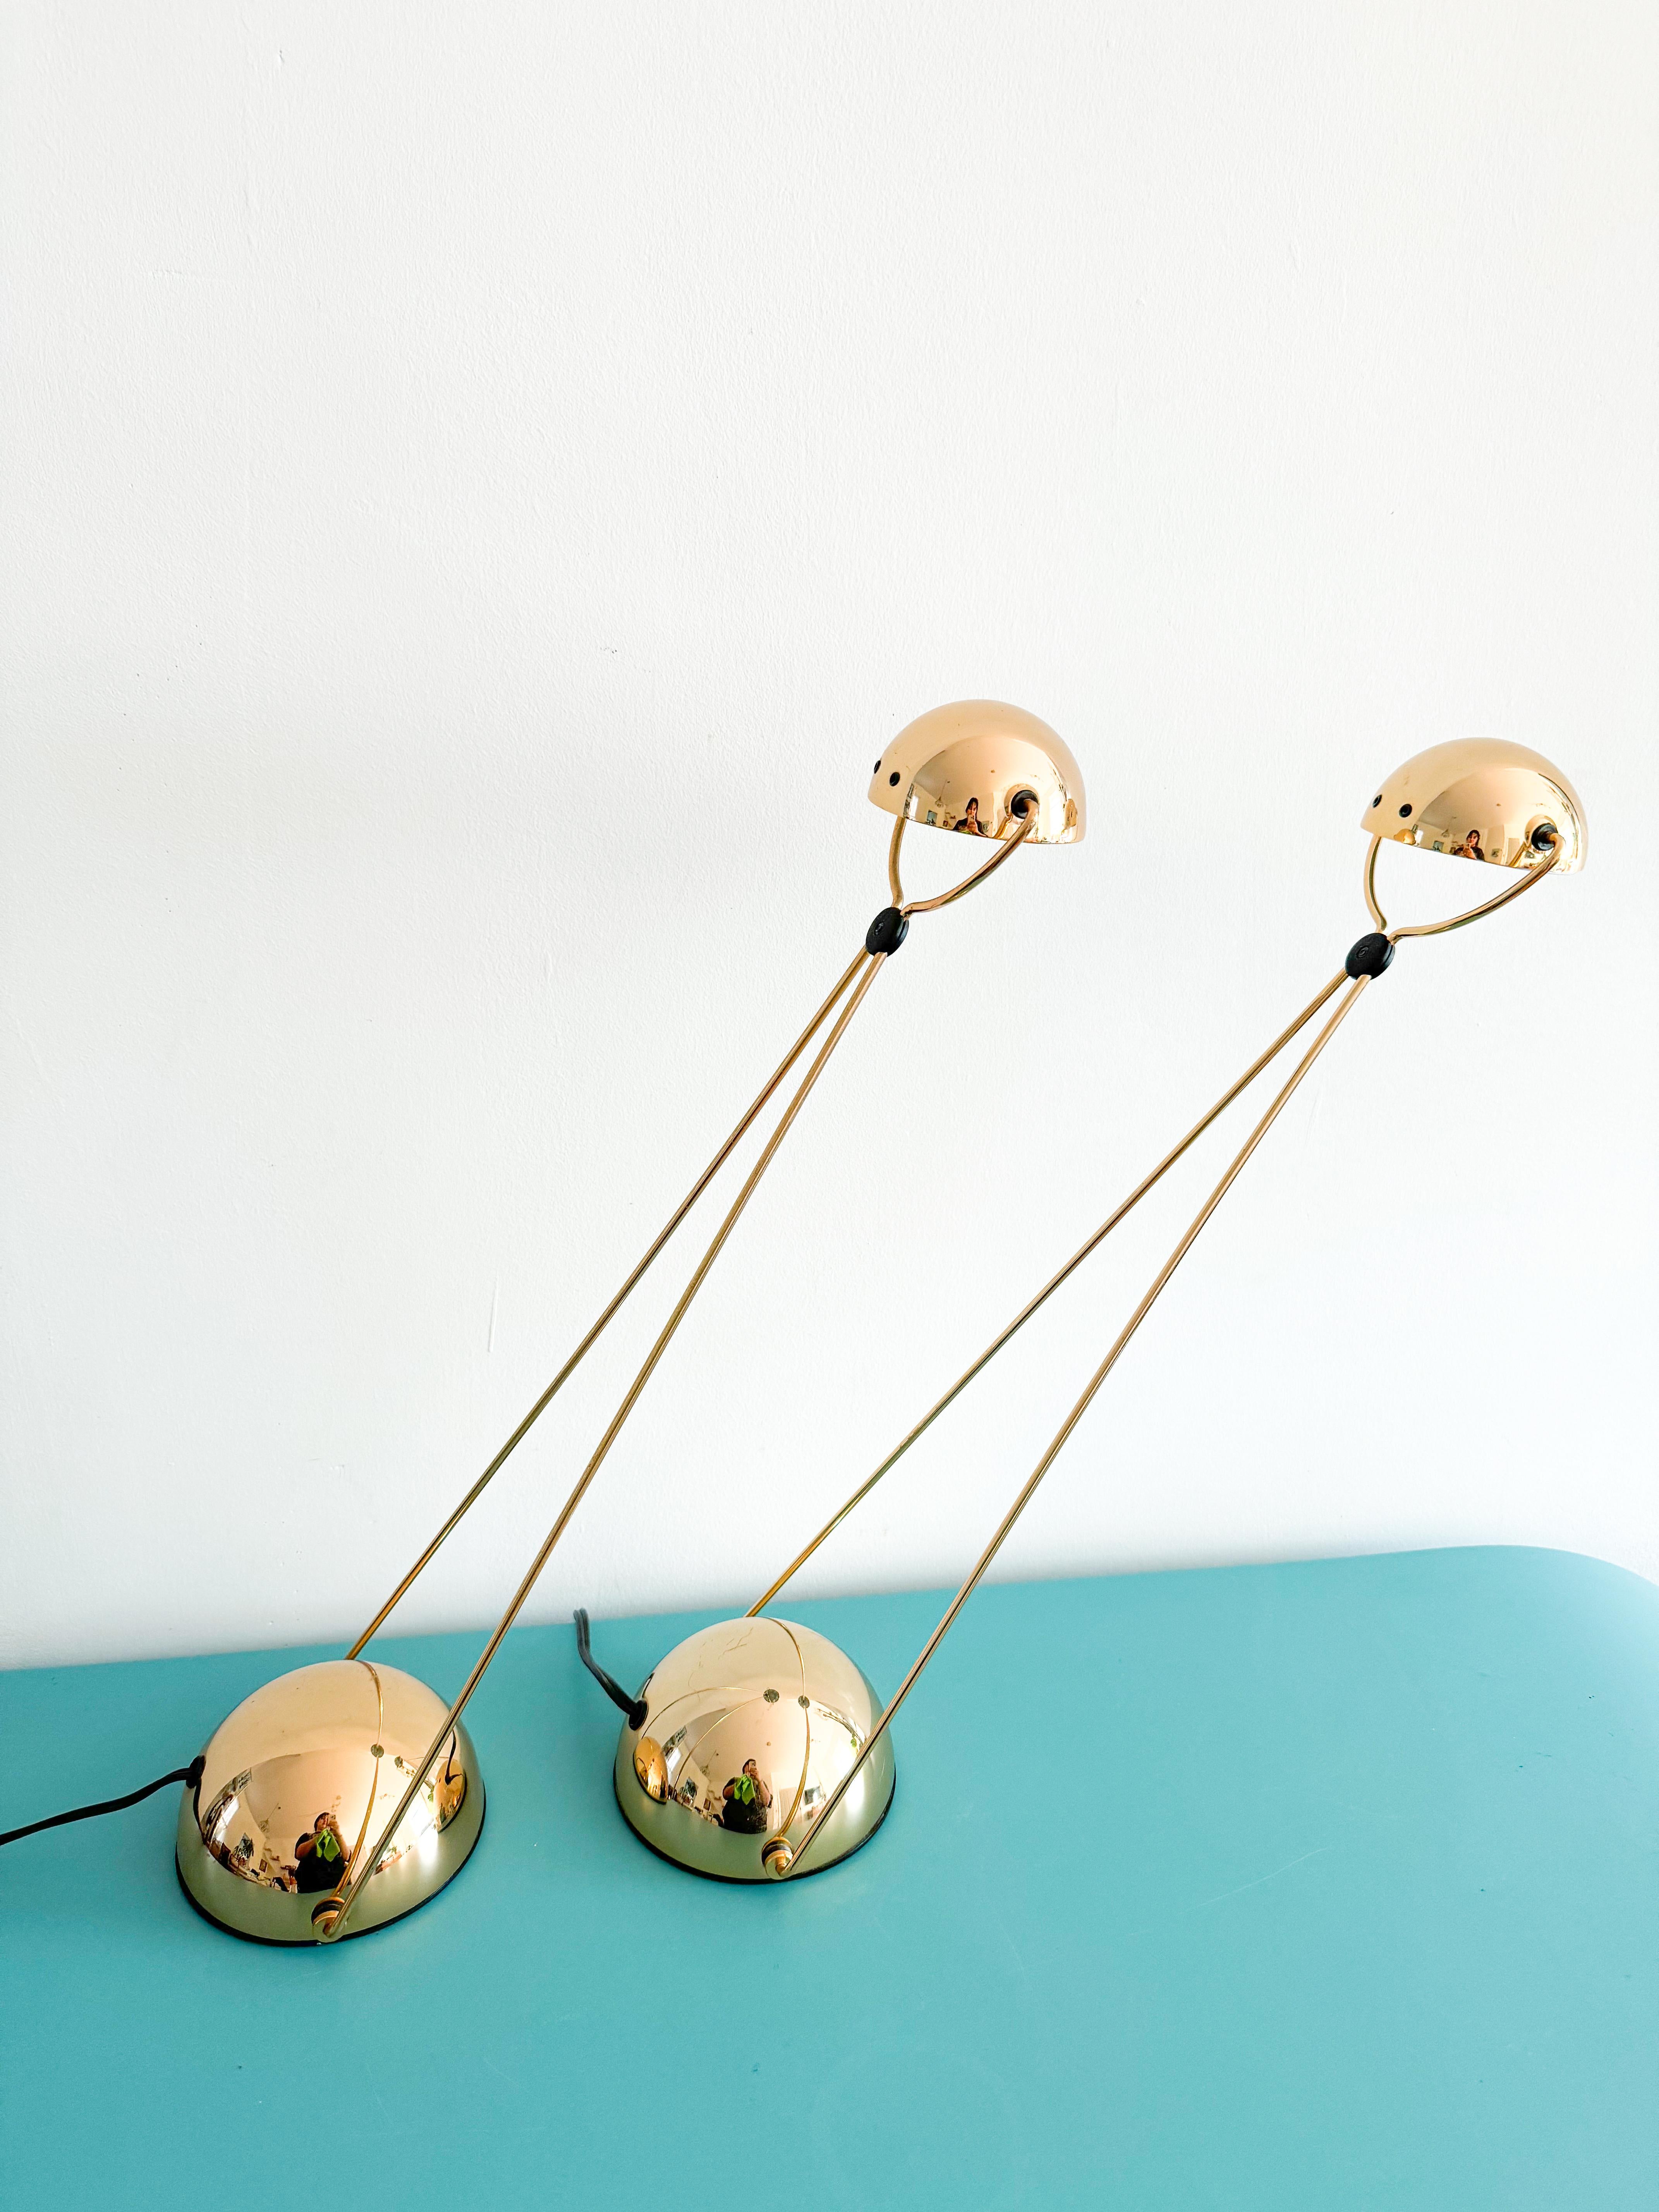 Pair of postmodern adjustable desk lamps by Stefano Cevoli, originating from Milano, Italy, in the 1980s. 
Crafted with a striking blend of bold gold accents and sleek black elements, these lamps showcase a refined, architectural aesthetic with a